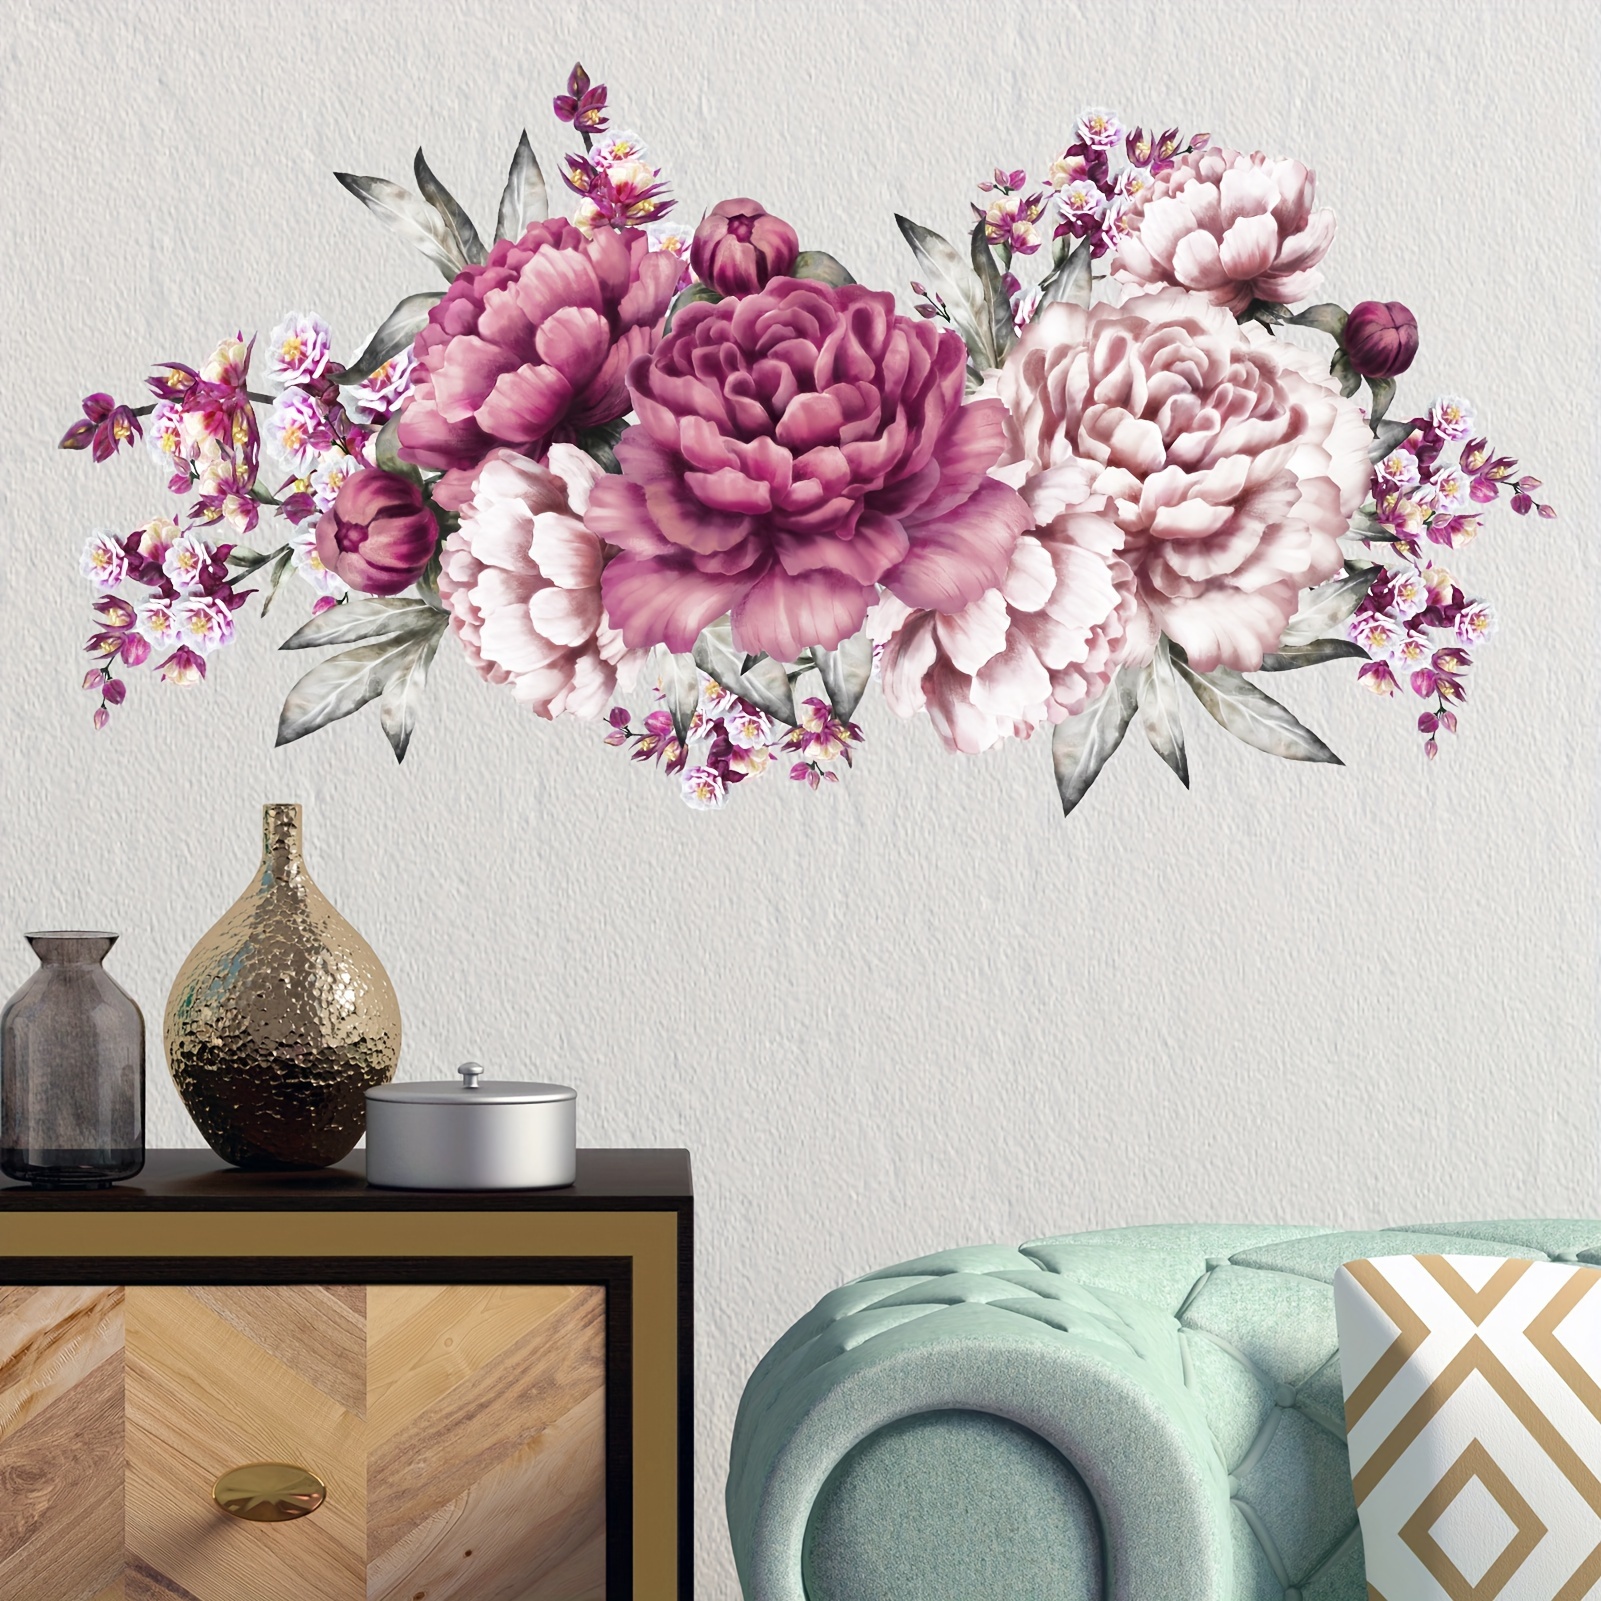 

1pc Contemporary Style Peony Rose Flower Pvc Wall Sticker, Blooming Floral Watercolor Decal, Elegant Home Decor For Bedroom, Living Room, Kitchen Window